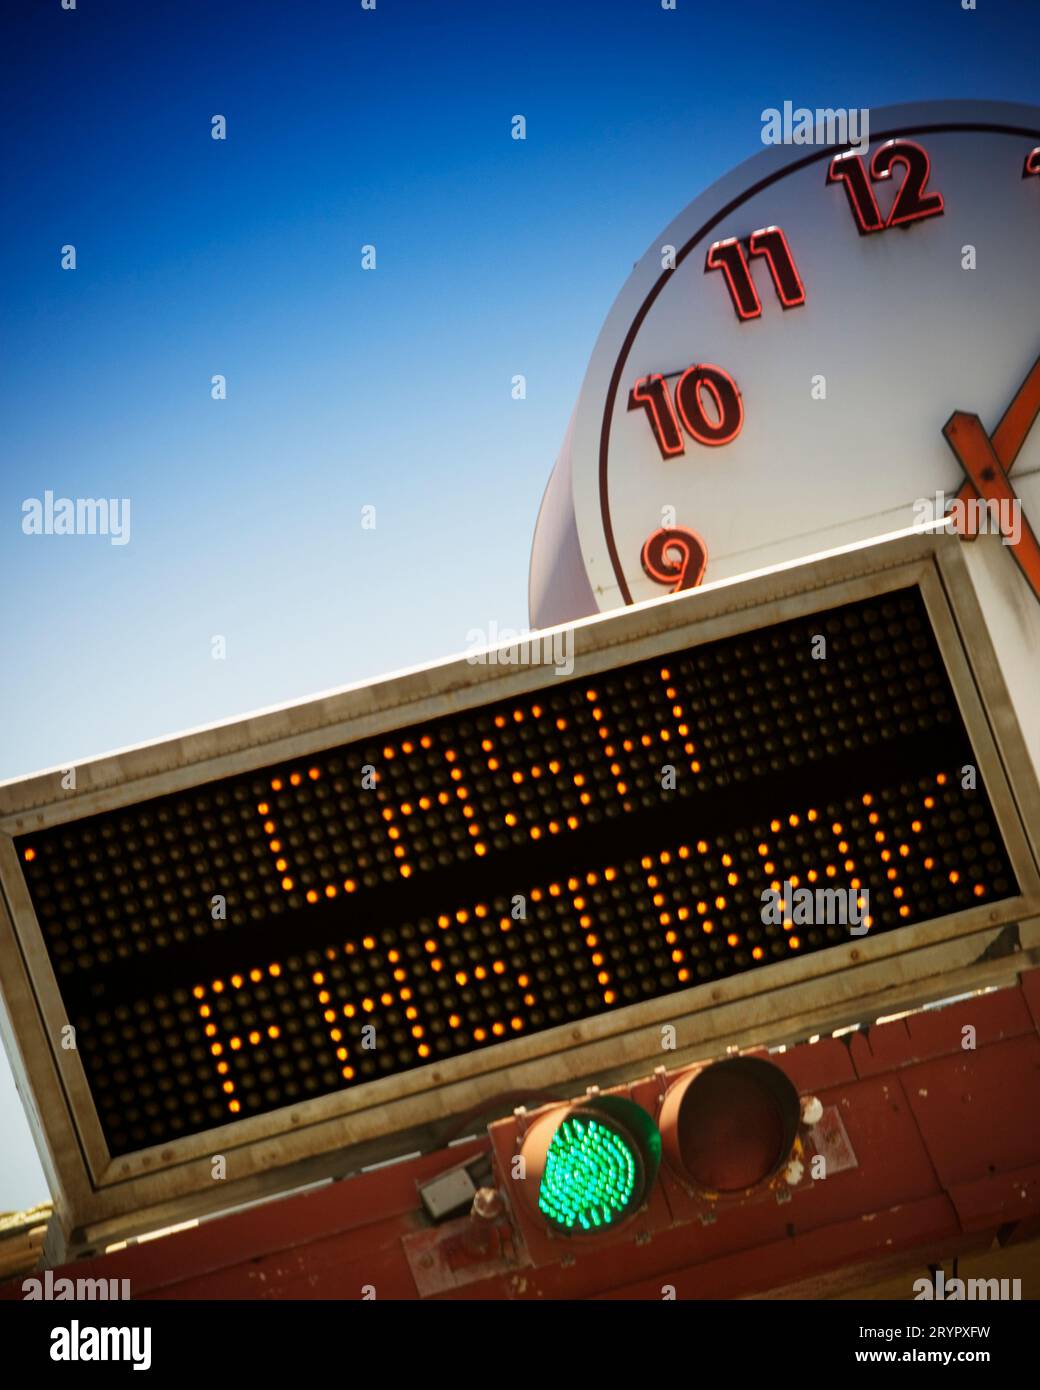 Illuminated cash, fast track sign and clock at the toll plaza on the Golden Gate Bridge tower and cables, San Francisco, California. Stock Photo